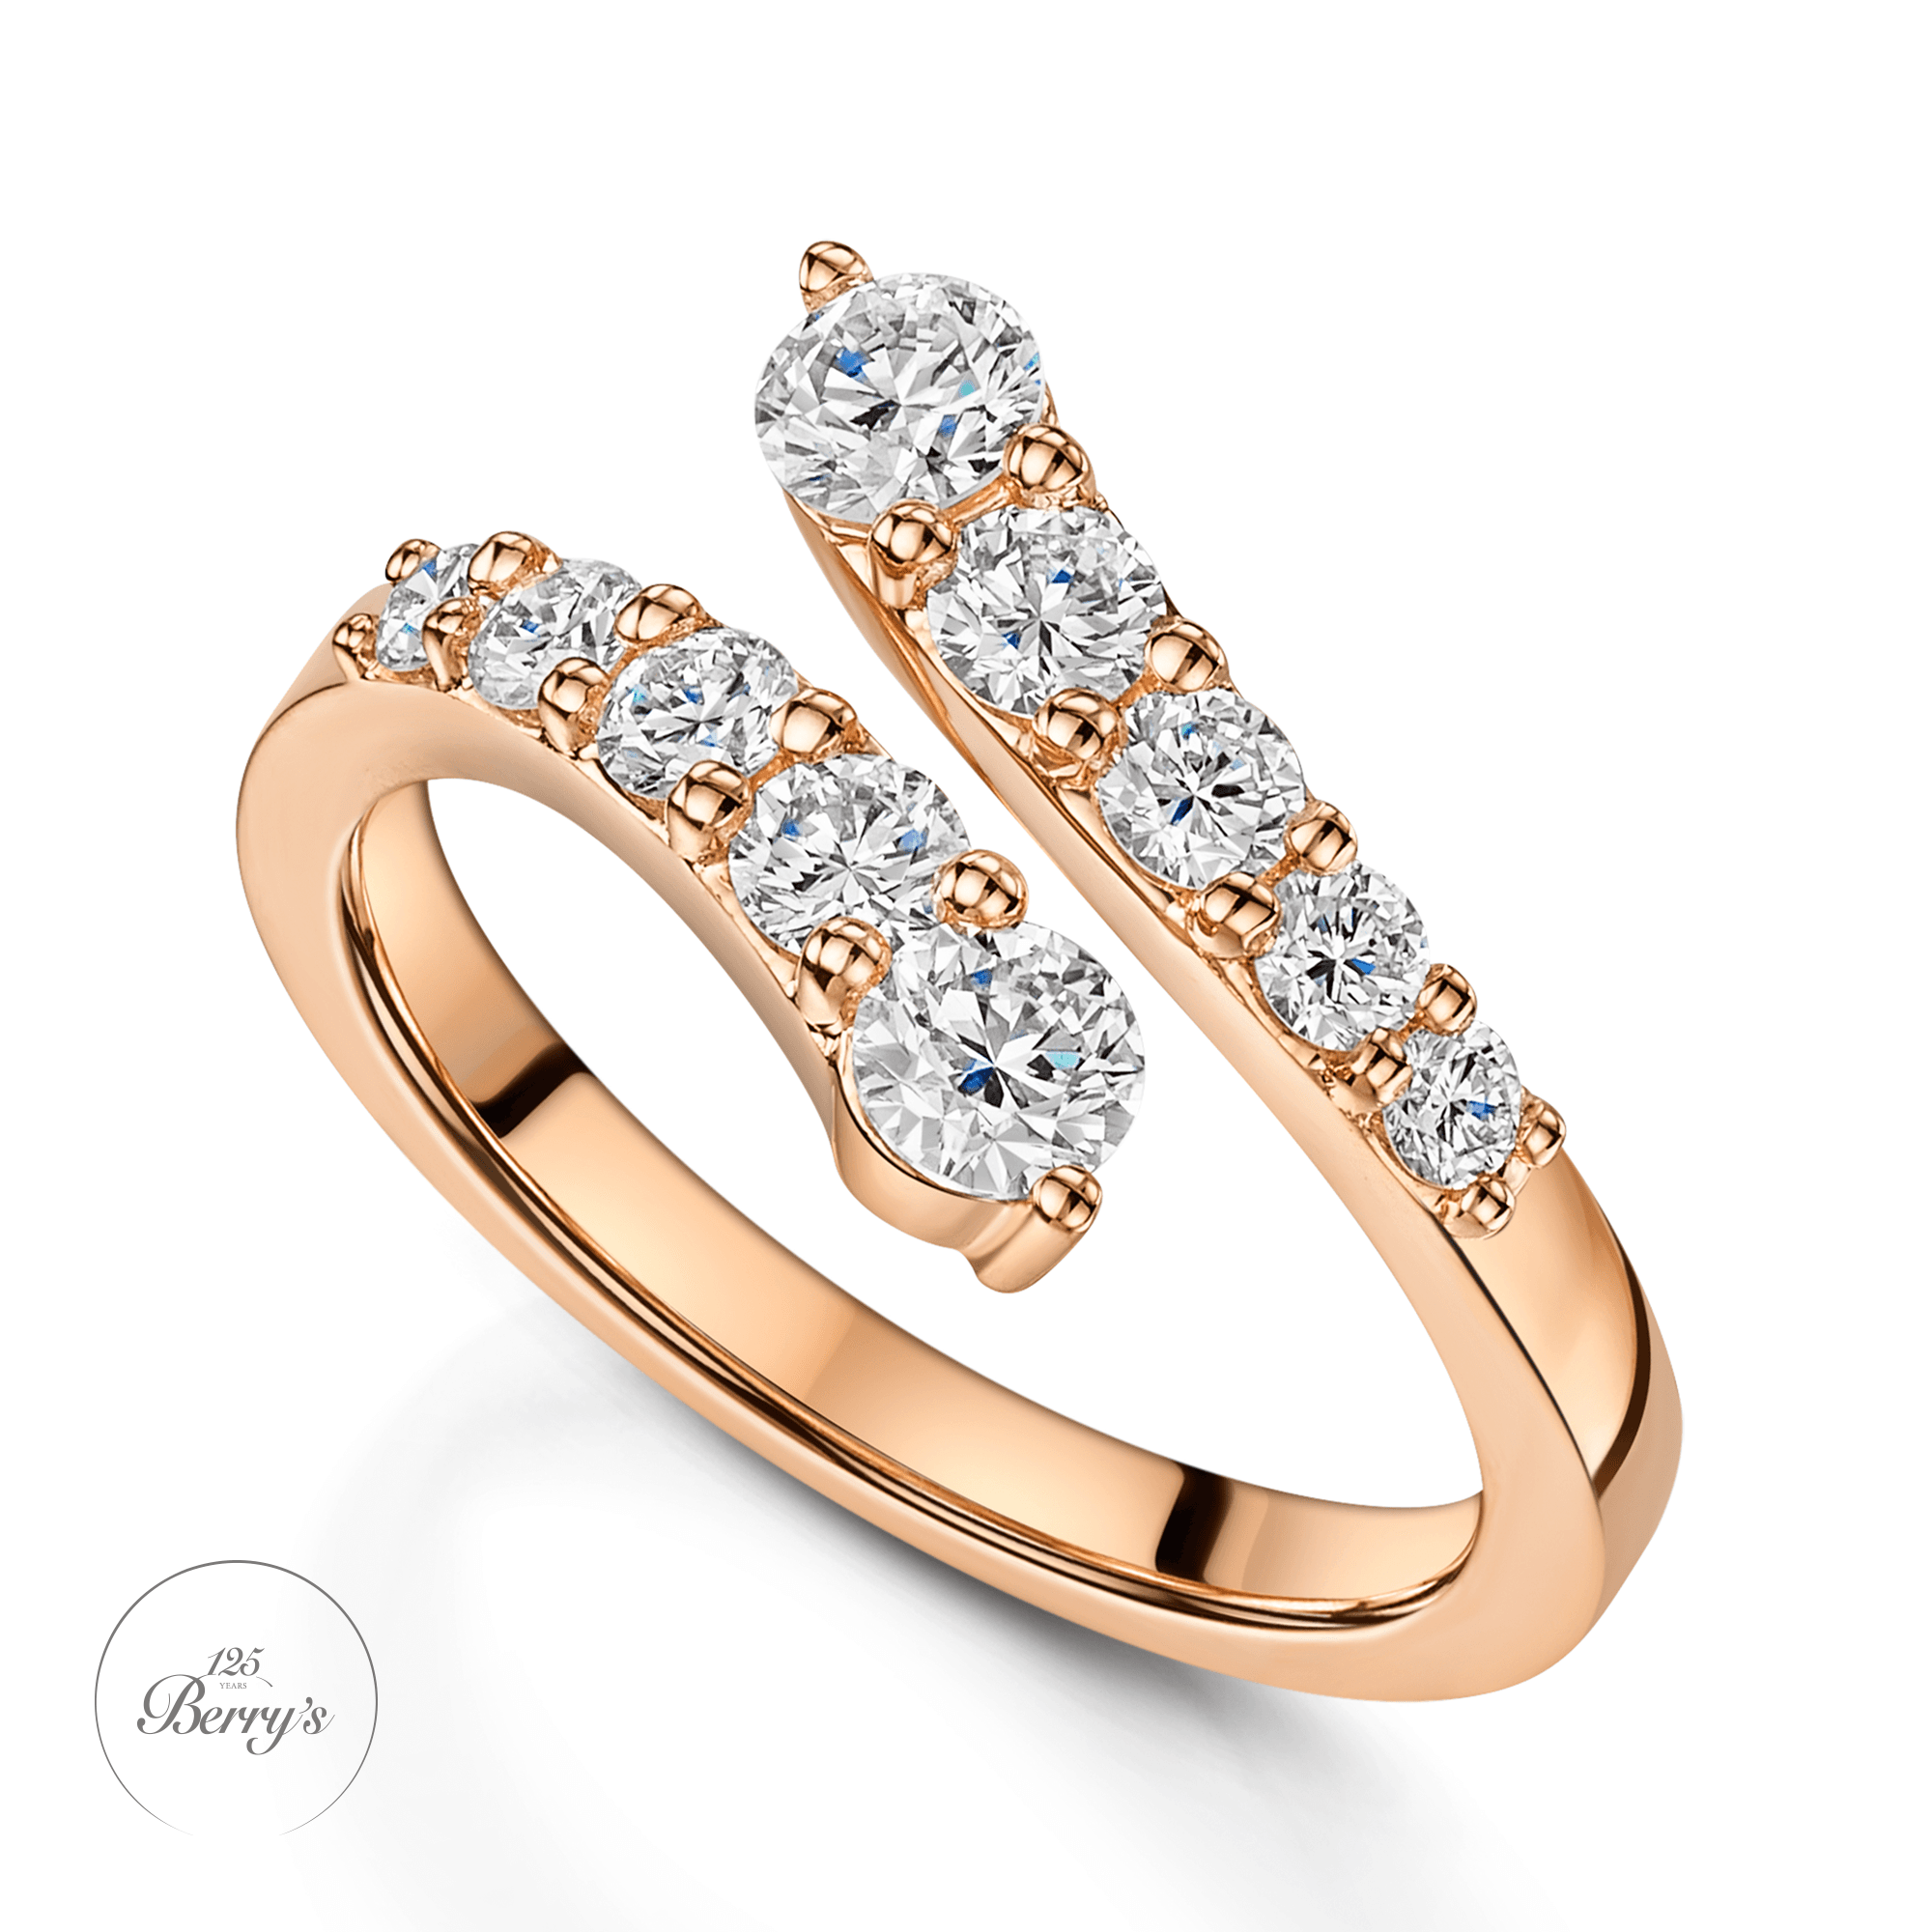 OPEIA Collection 18ct Rose Gold Round Brilliant Cut Diamond Fancy Single Row Cross Over Ring